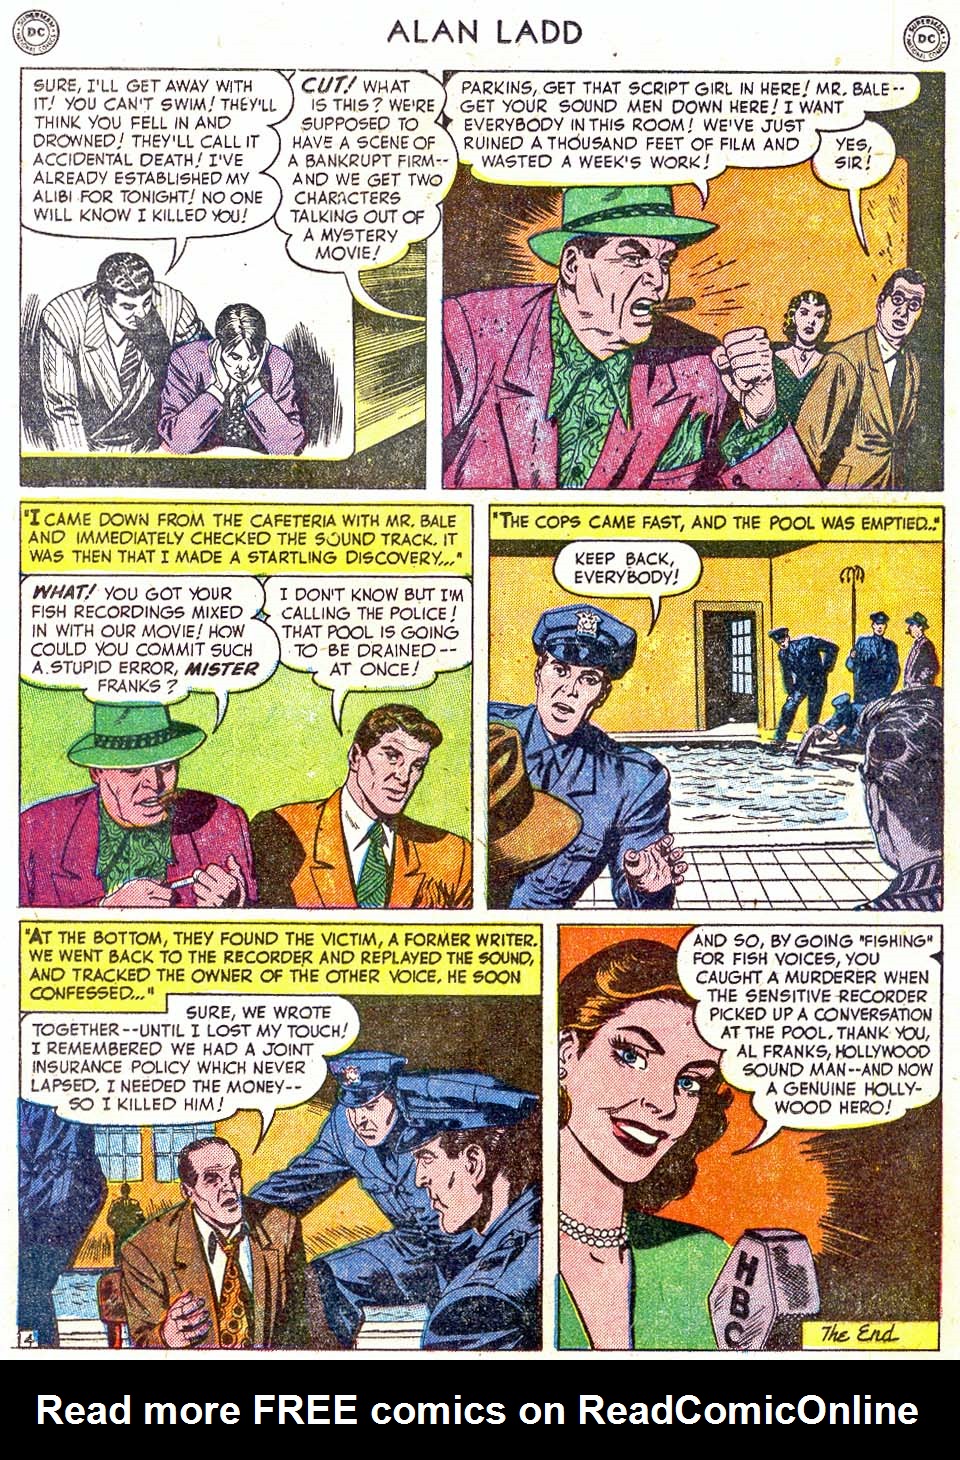 Read online Adventures of Alan Ladd comic -  Issue #6 - 18